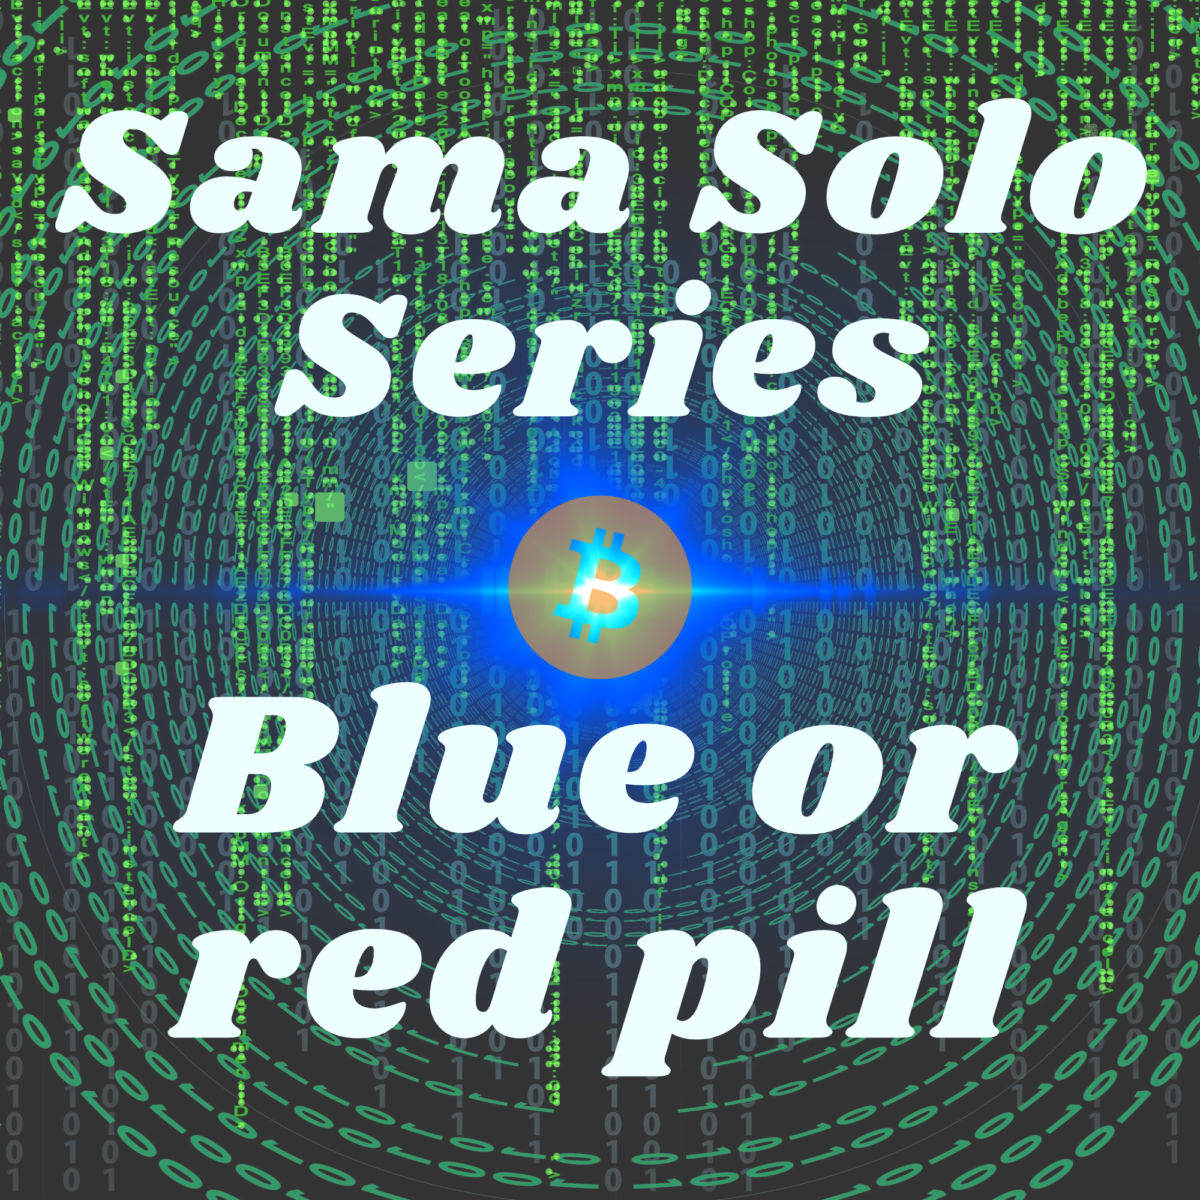 Sama Solo Series: Blue or red pill